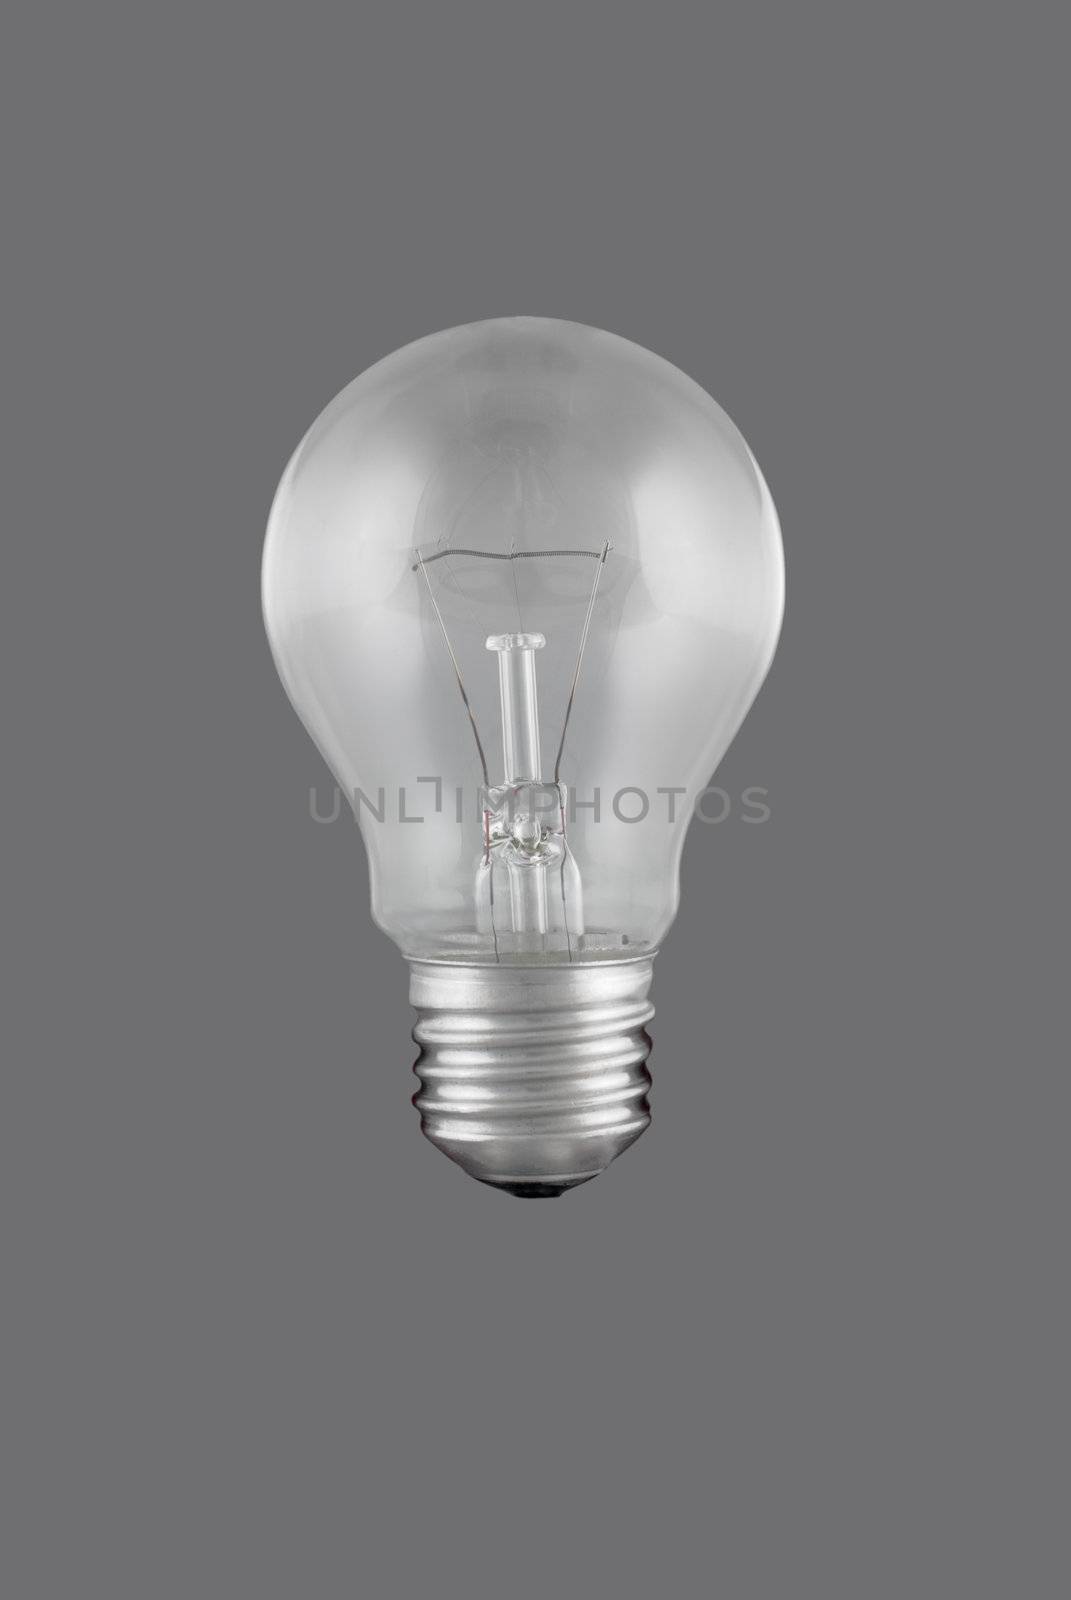 A light bulb isolated on a solid color background.